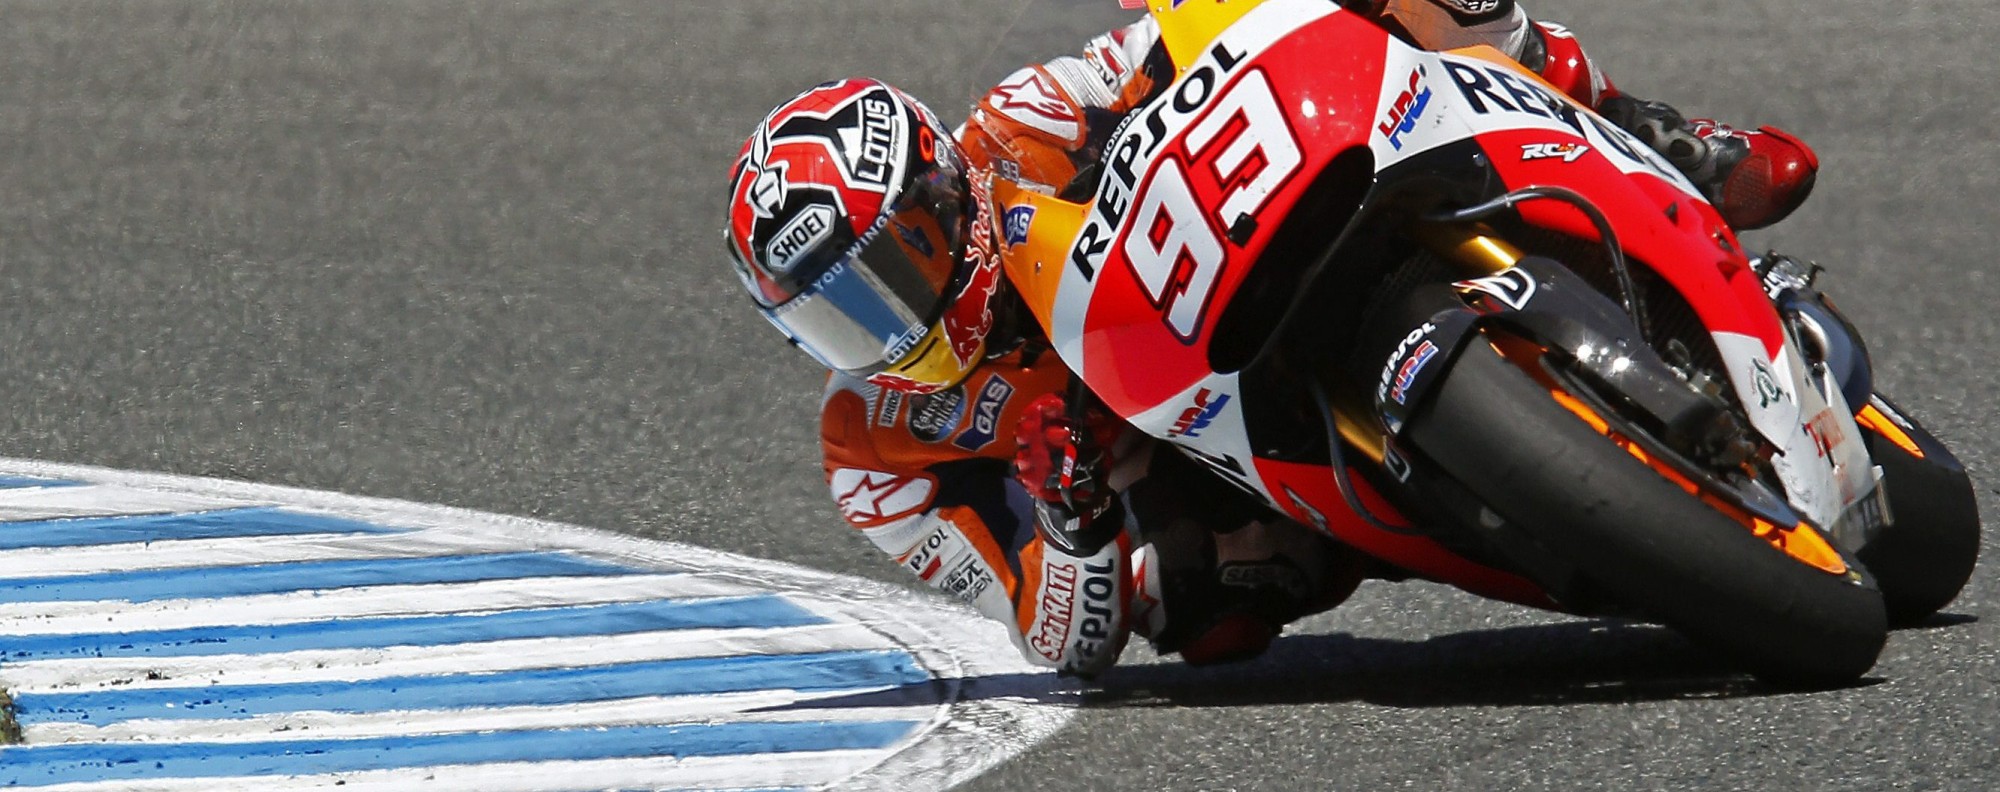 Marc Marquez notches fourth straight win of the season at Spain MotoGP |  South China Morning Post